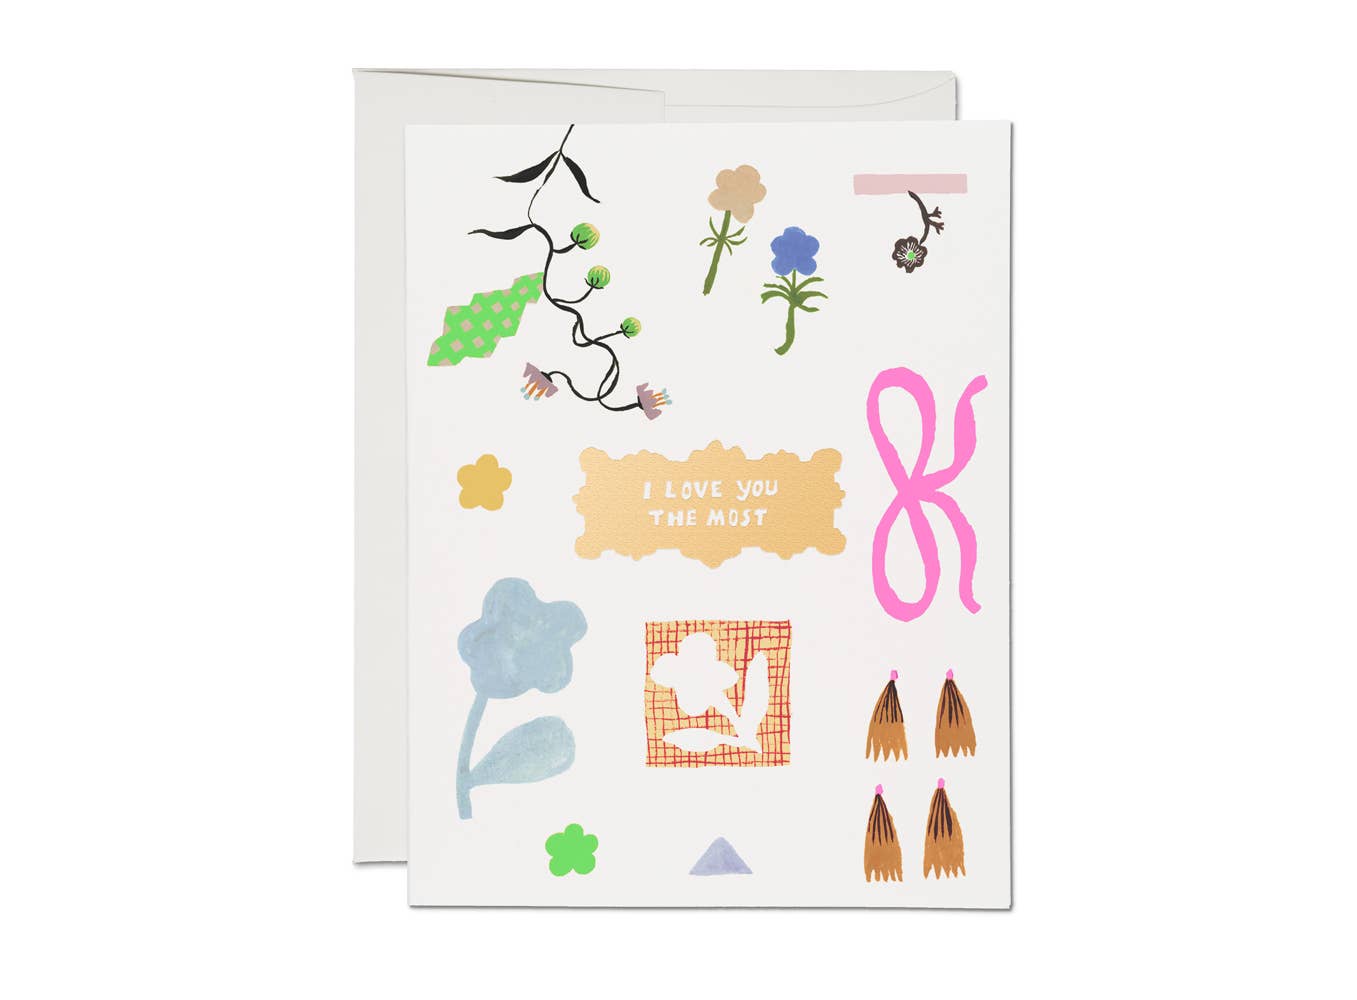 Petals and Blooms love greeting card